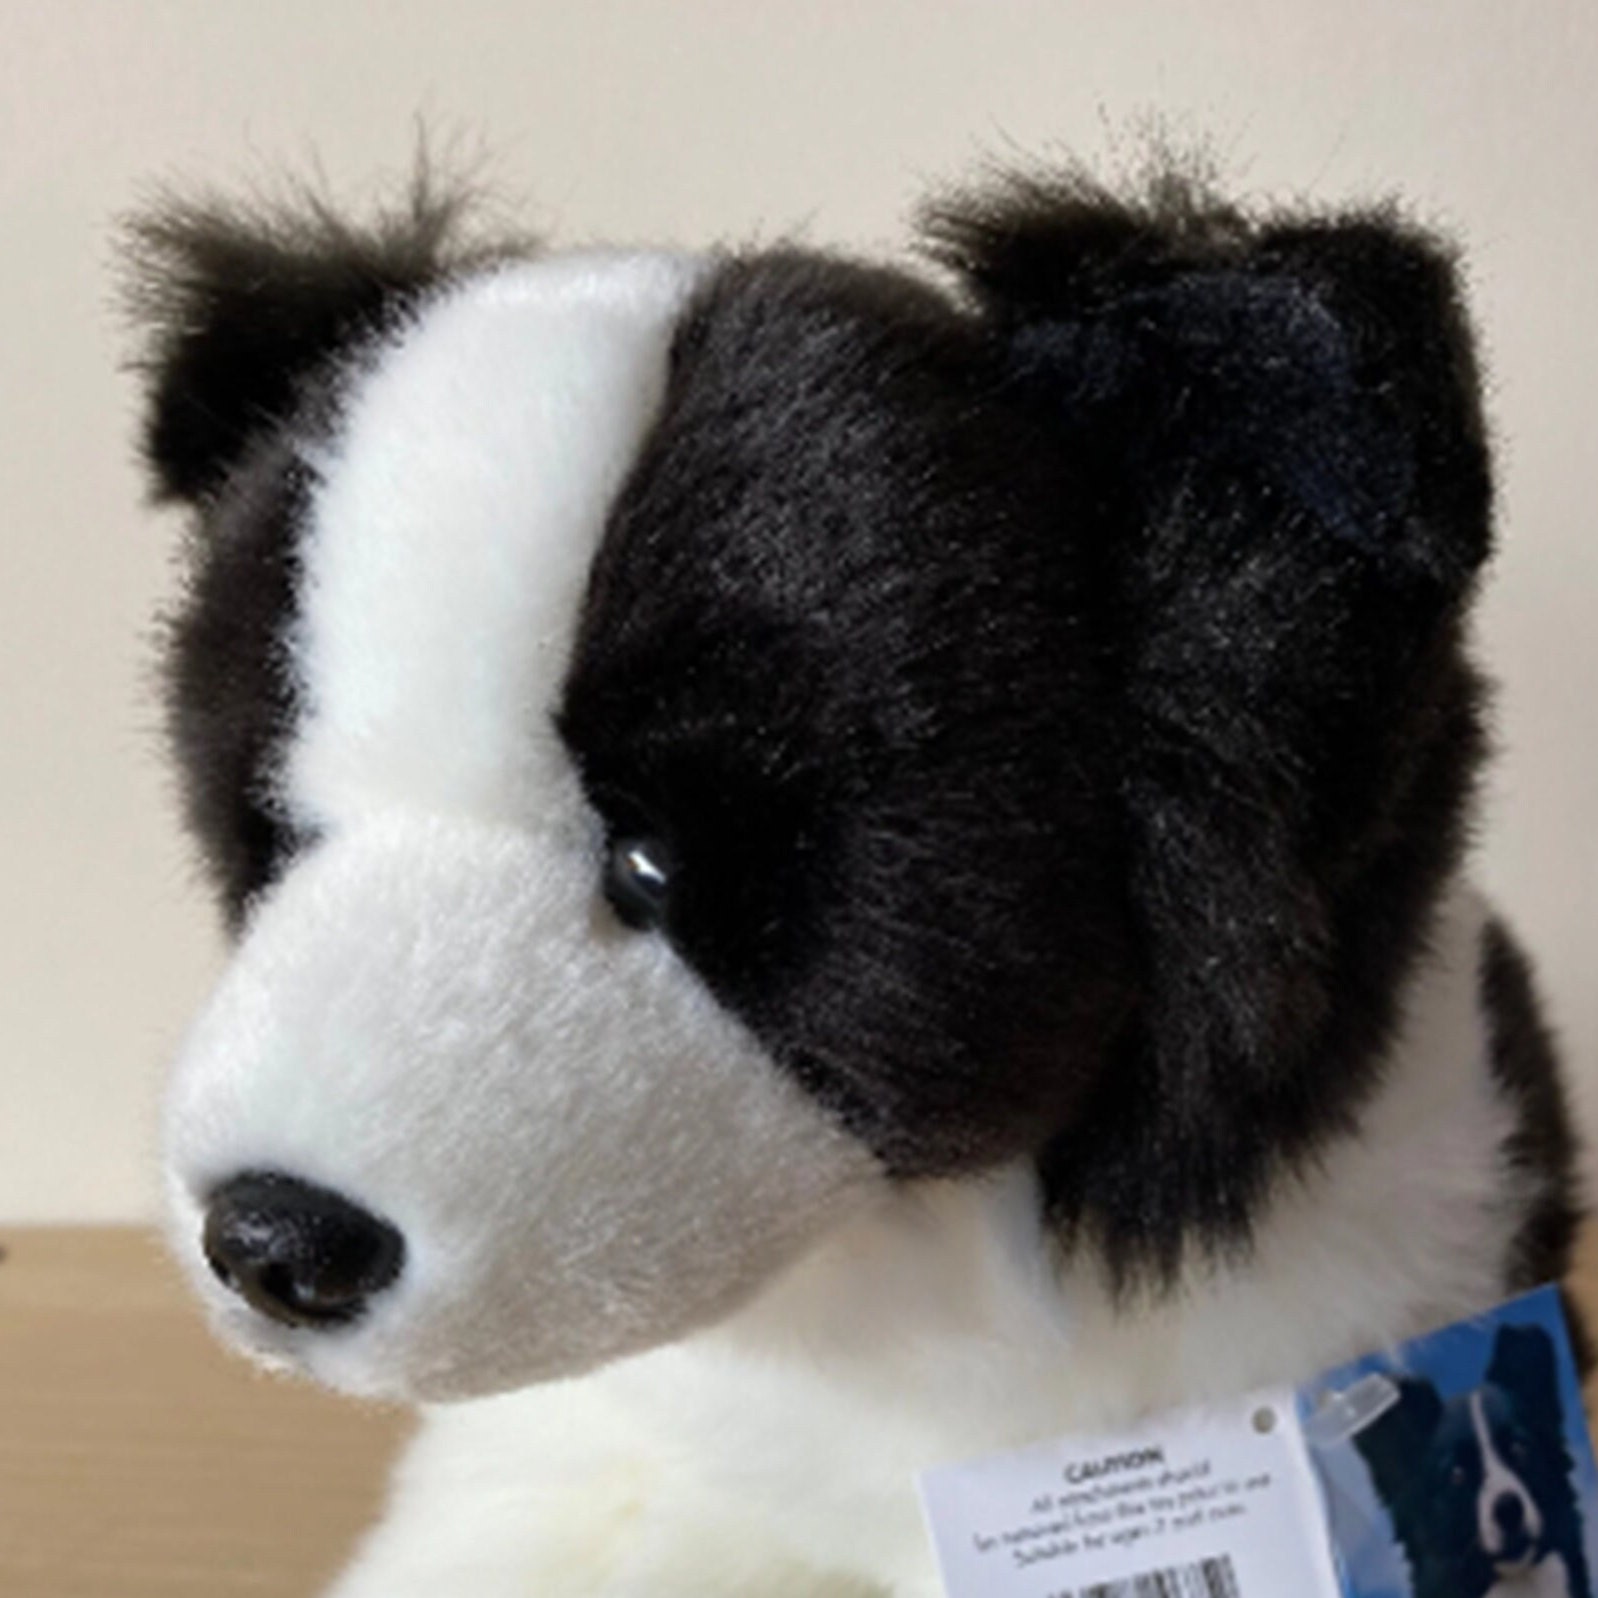 VIAHART Borna The Border Collie | 11 inch Stuffed Animal Plush | by Tiger Tale Toys